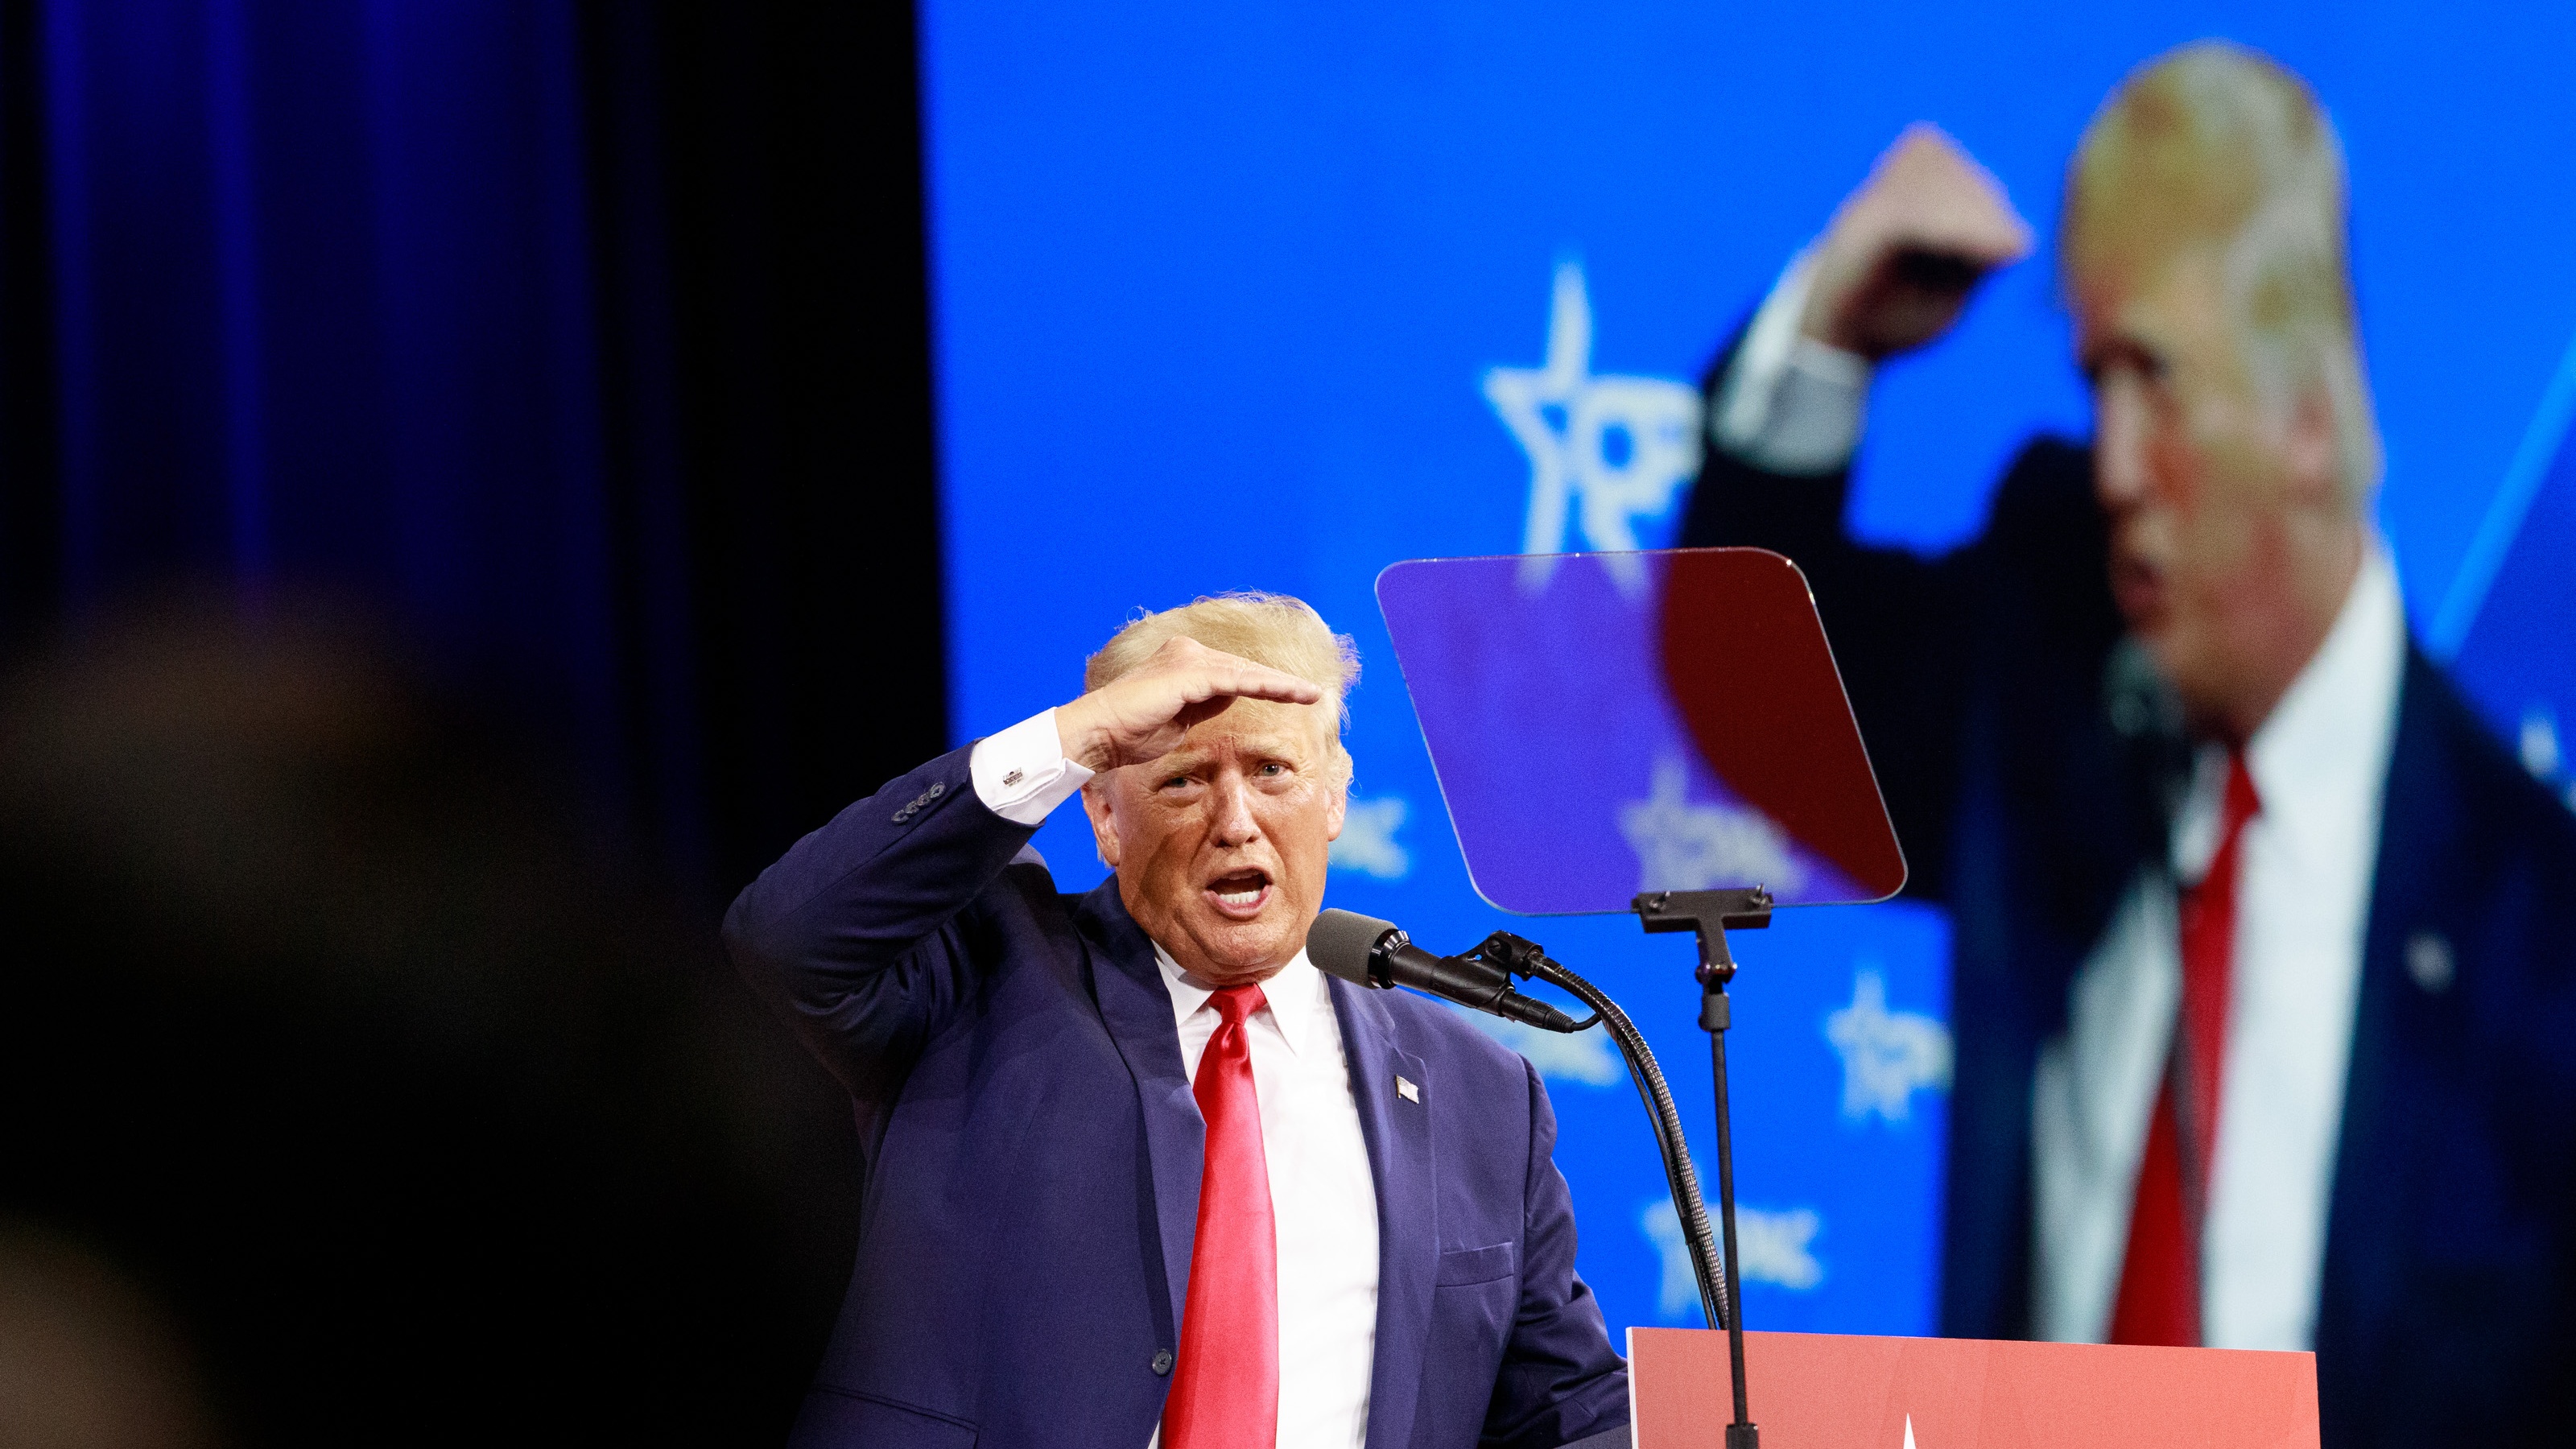 Donald Trump addresses the Conservative Political Action Conference in Florida